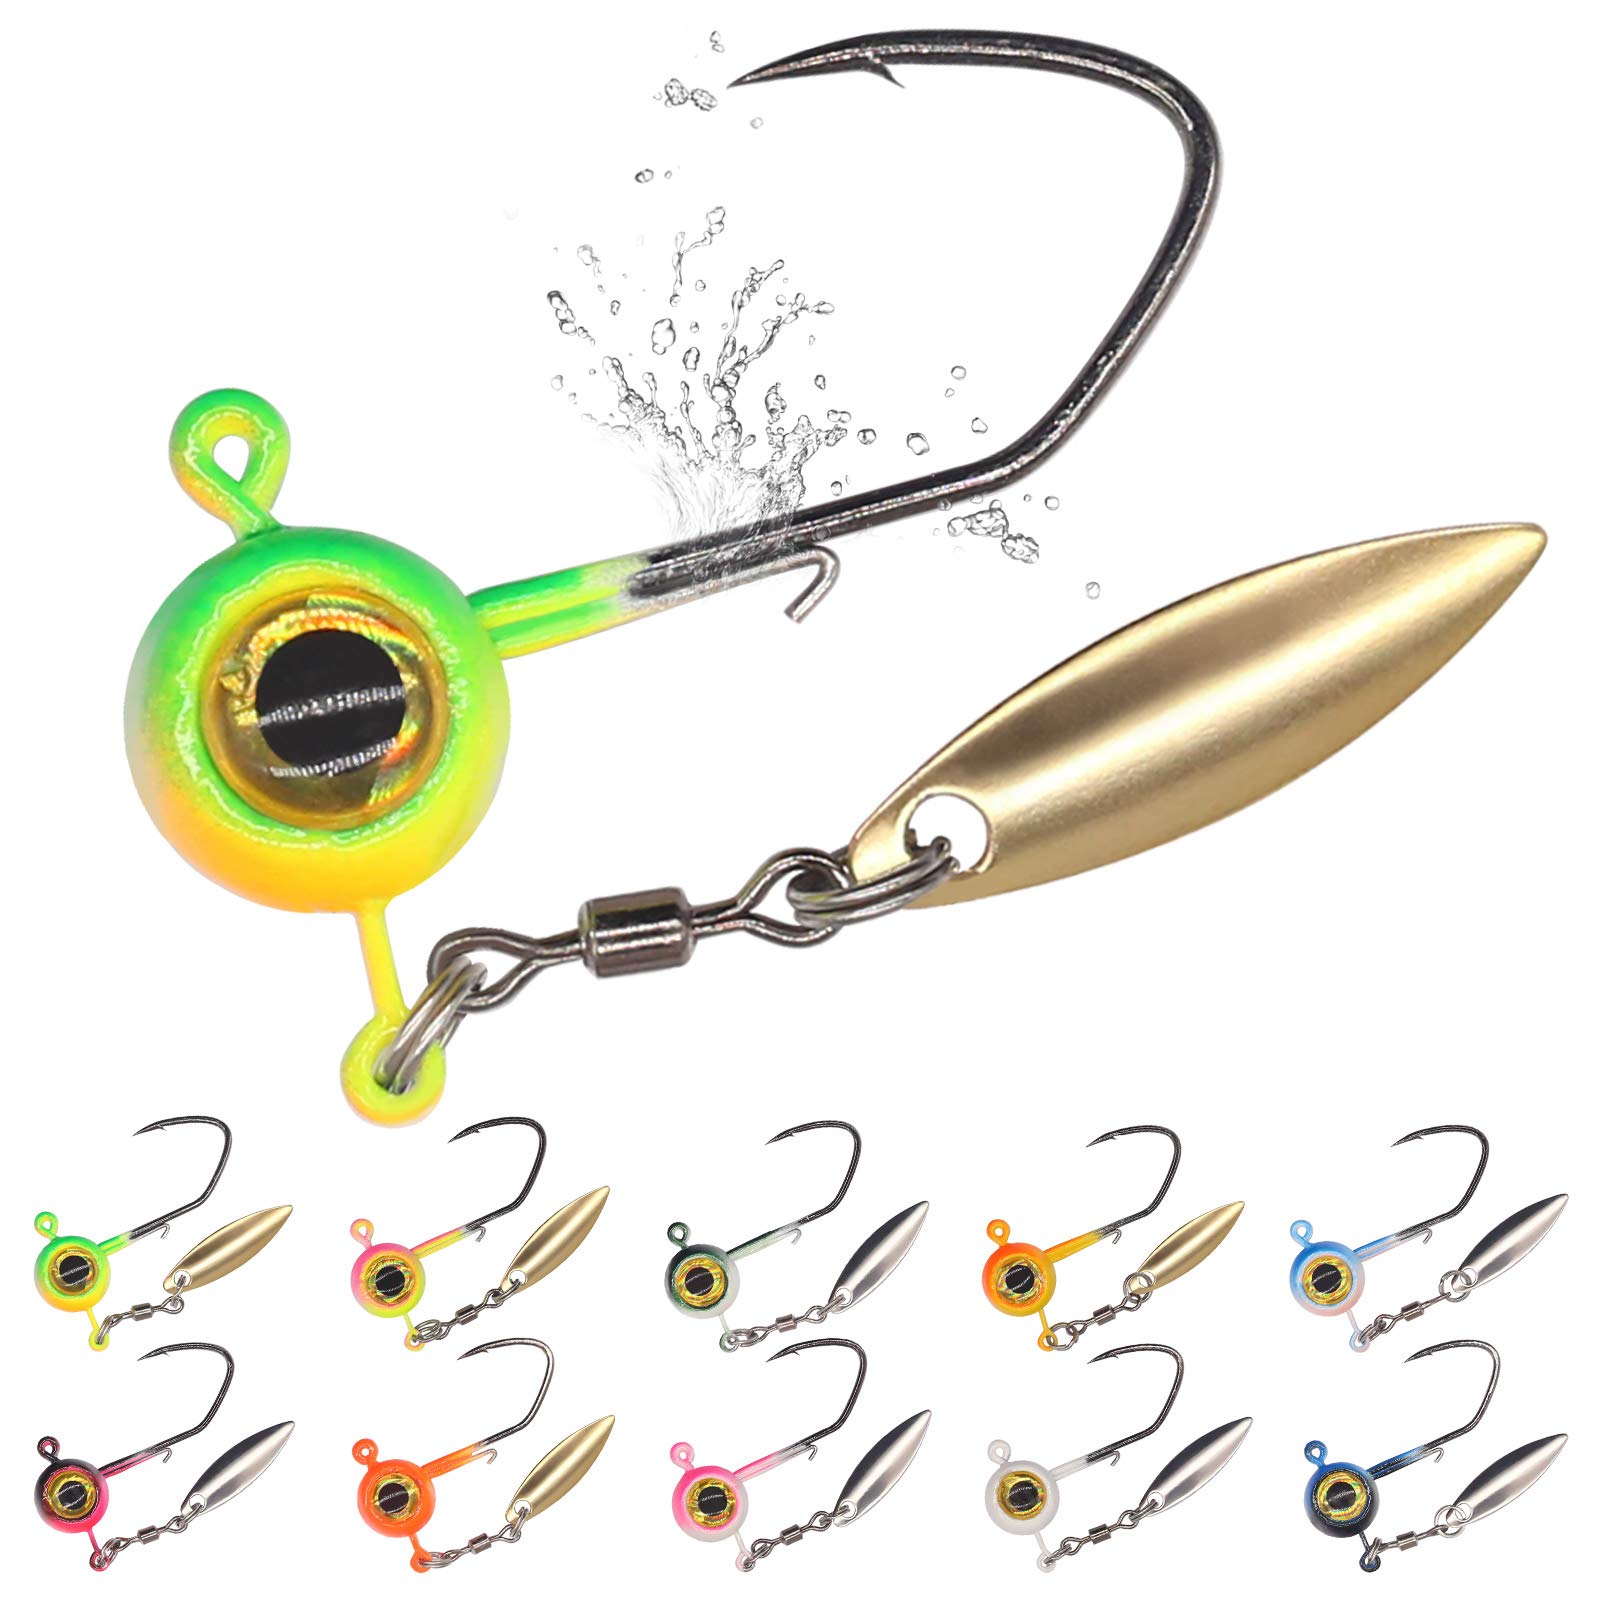 Crappie-Jig-Heads-Kit-with-Underspin-Jig-Head-Spinner-Blade, Crappie Lures  and Jigs for Crappie Fishing Jigs - 30 & 50 Pack, 1/8, 1/16, 1/32 oz  1/32oz-W/Spinner-30 Pack